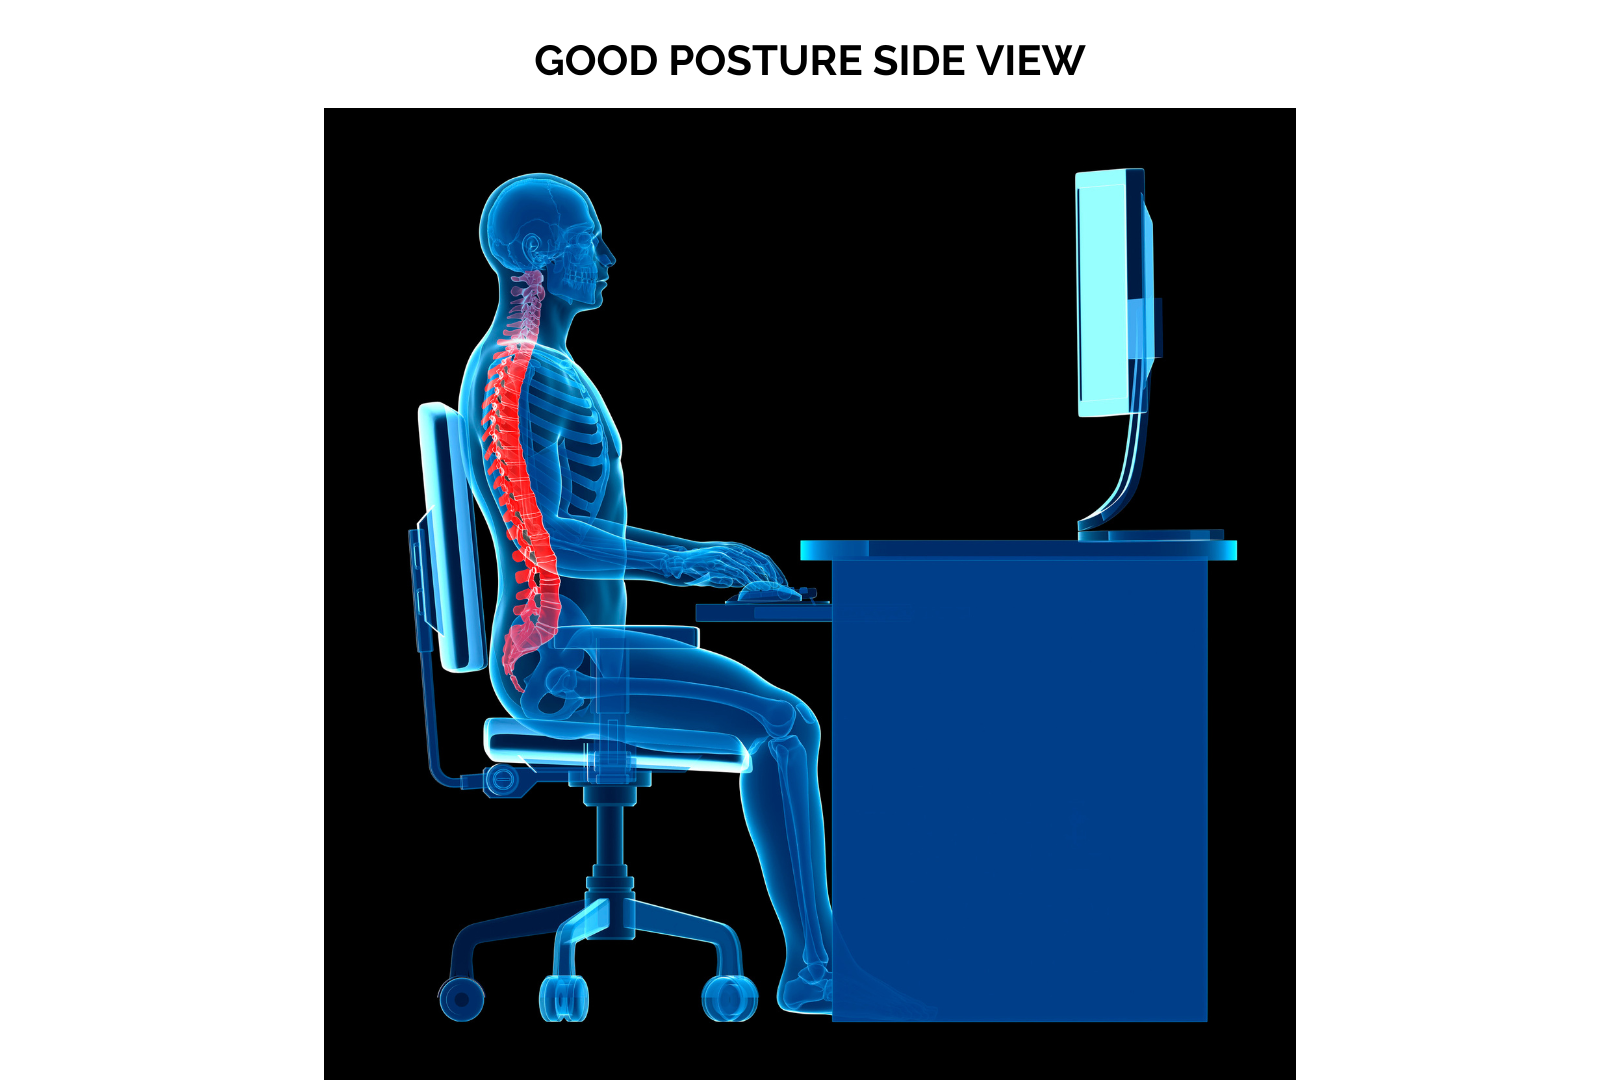 Good Posture Side View (with title)